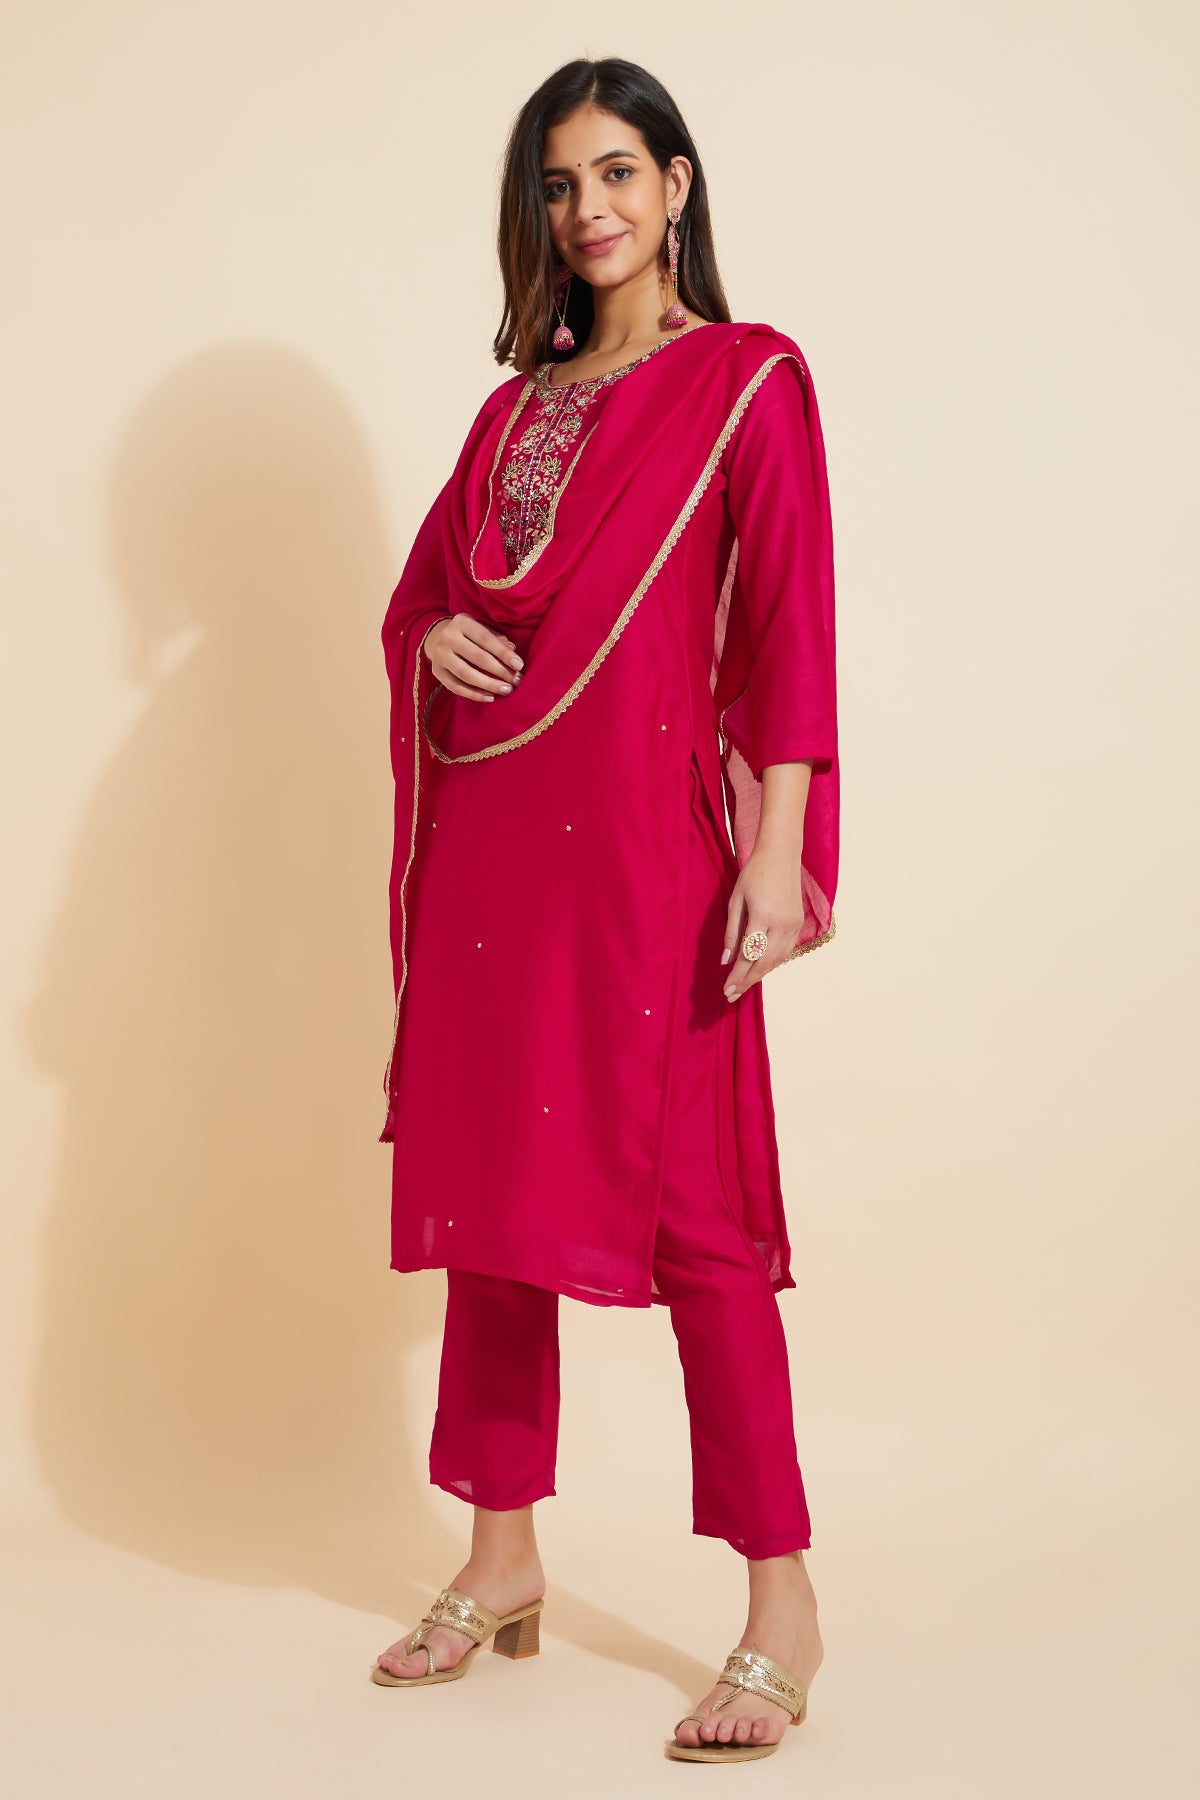 Floral Beads Embroidered Yoke With Embellished Dupatta Pink